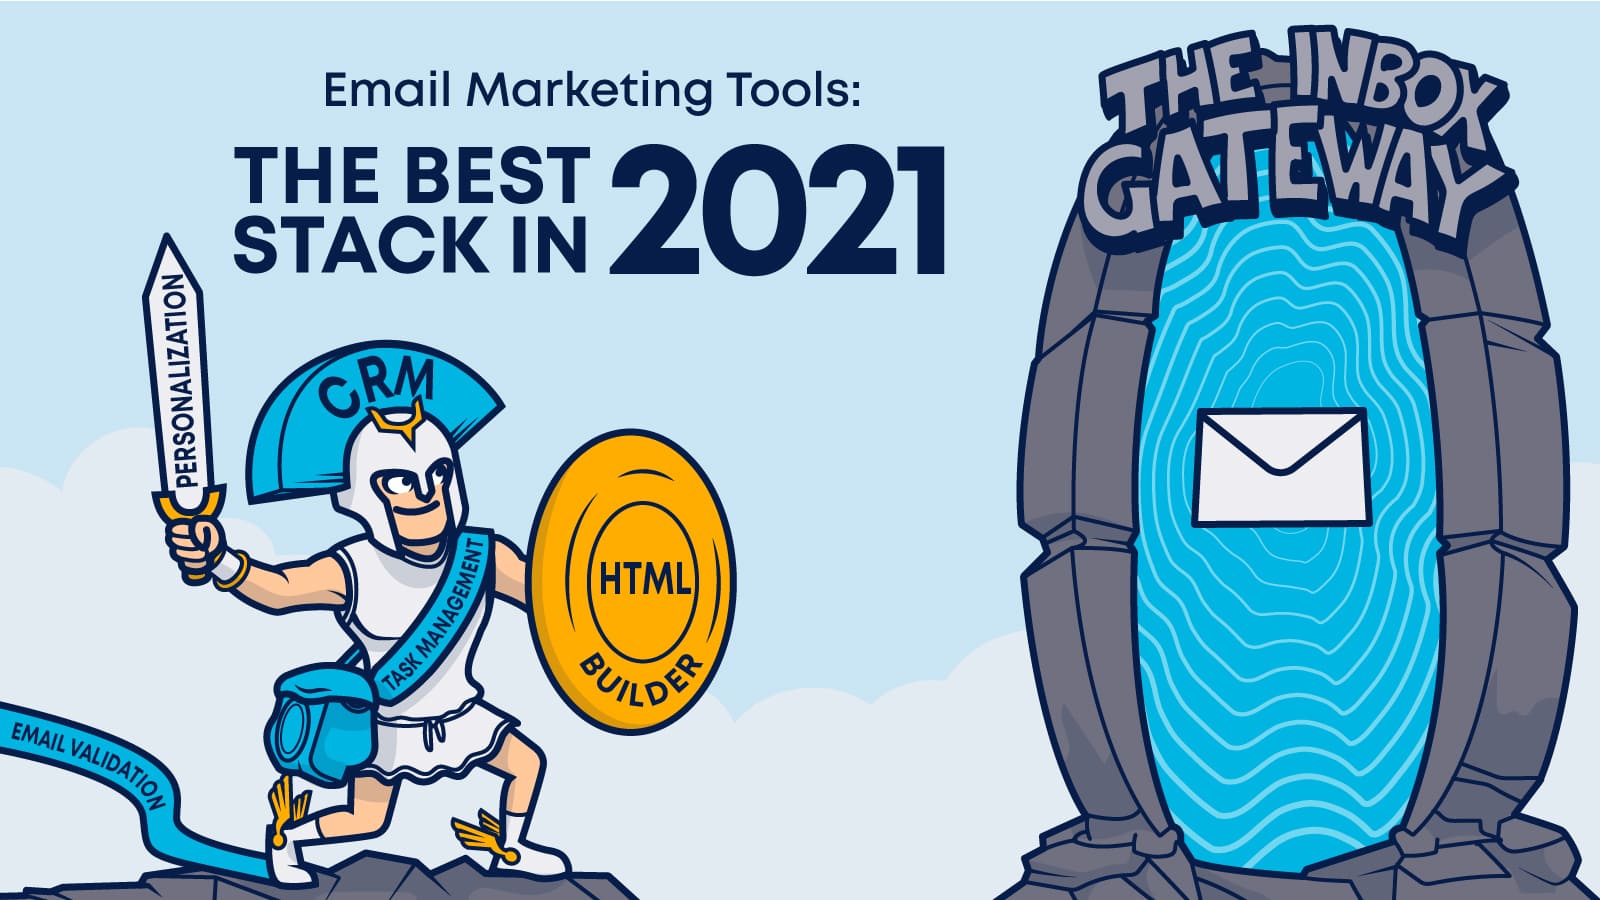 Email Marketing Tools: The Best Stack in 2021